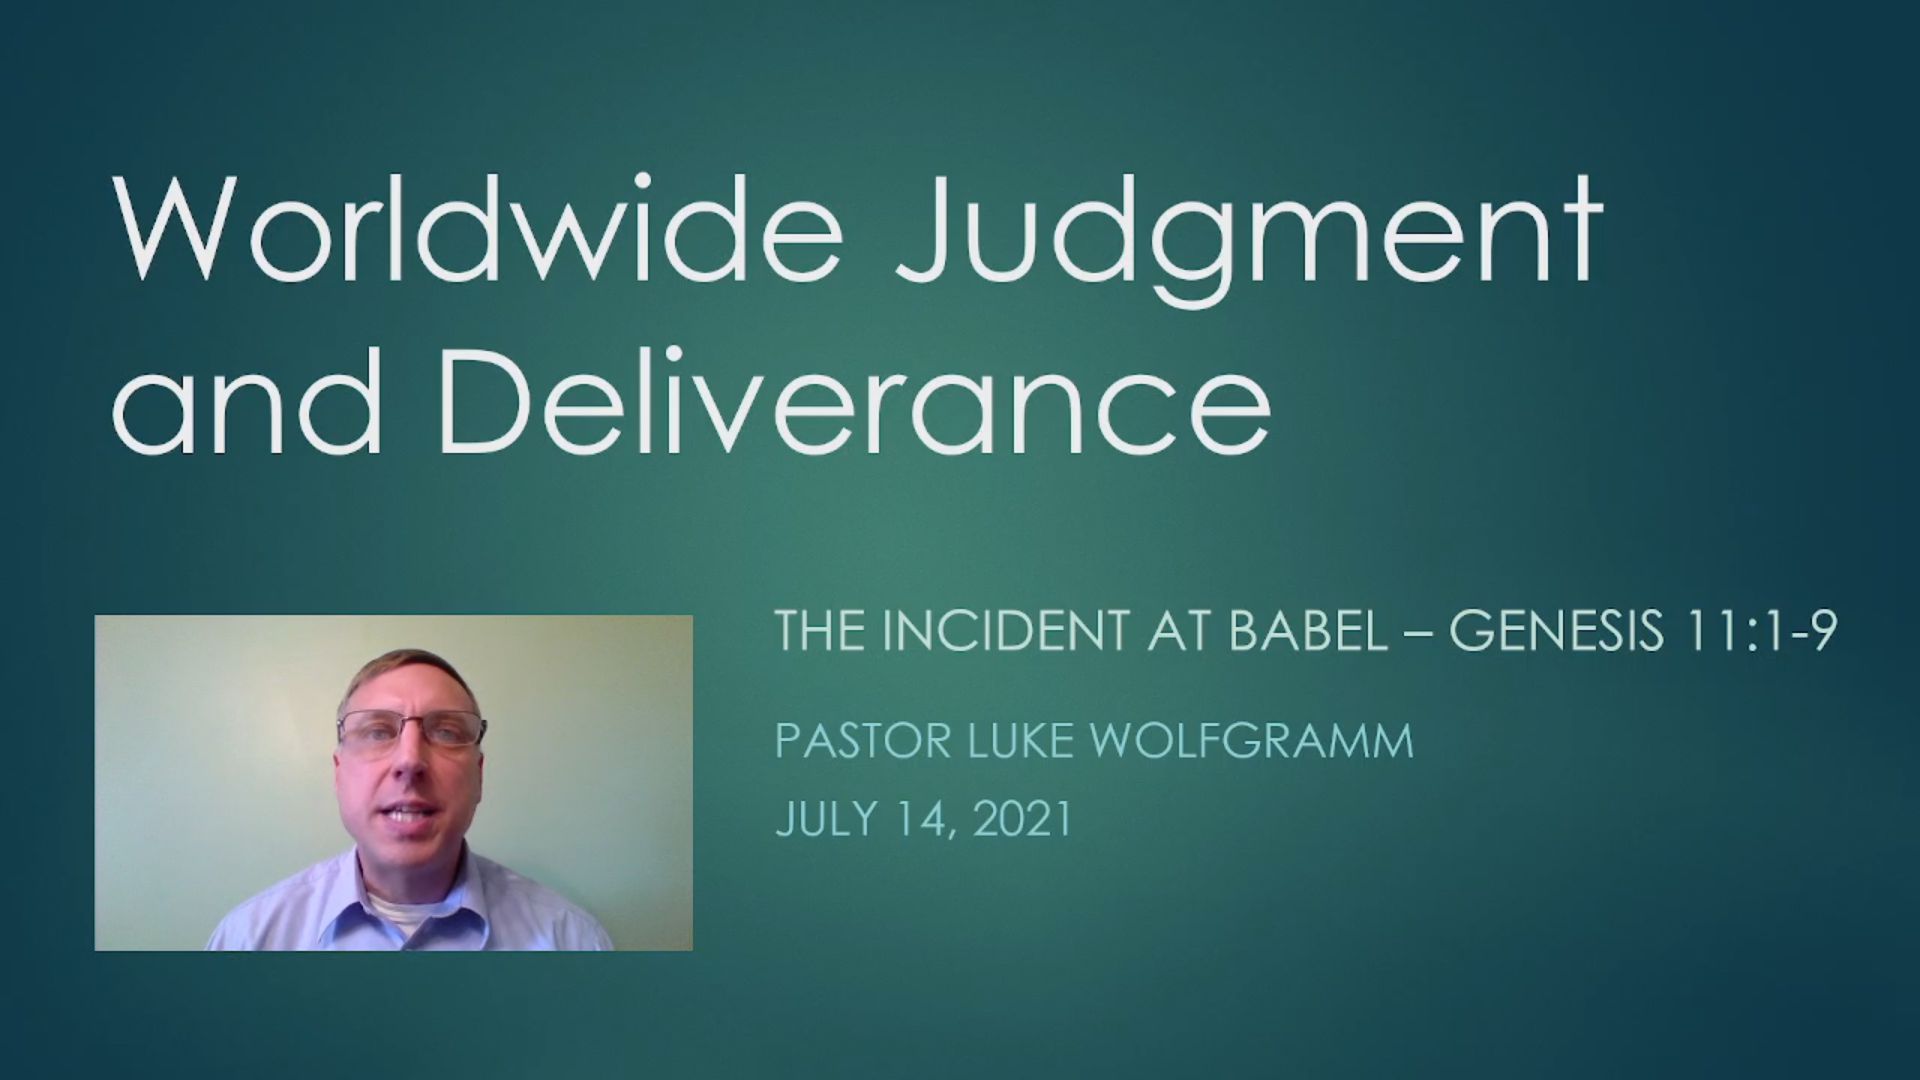 The incident at Babel – Genesis 11:1-9